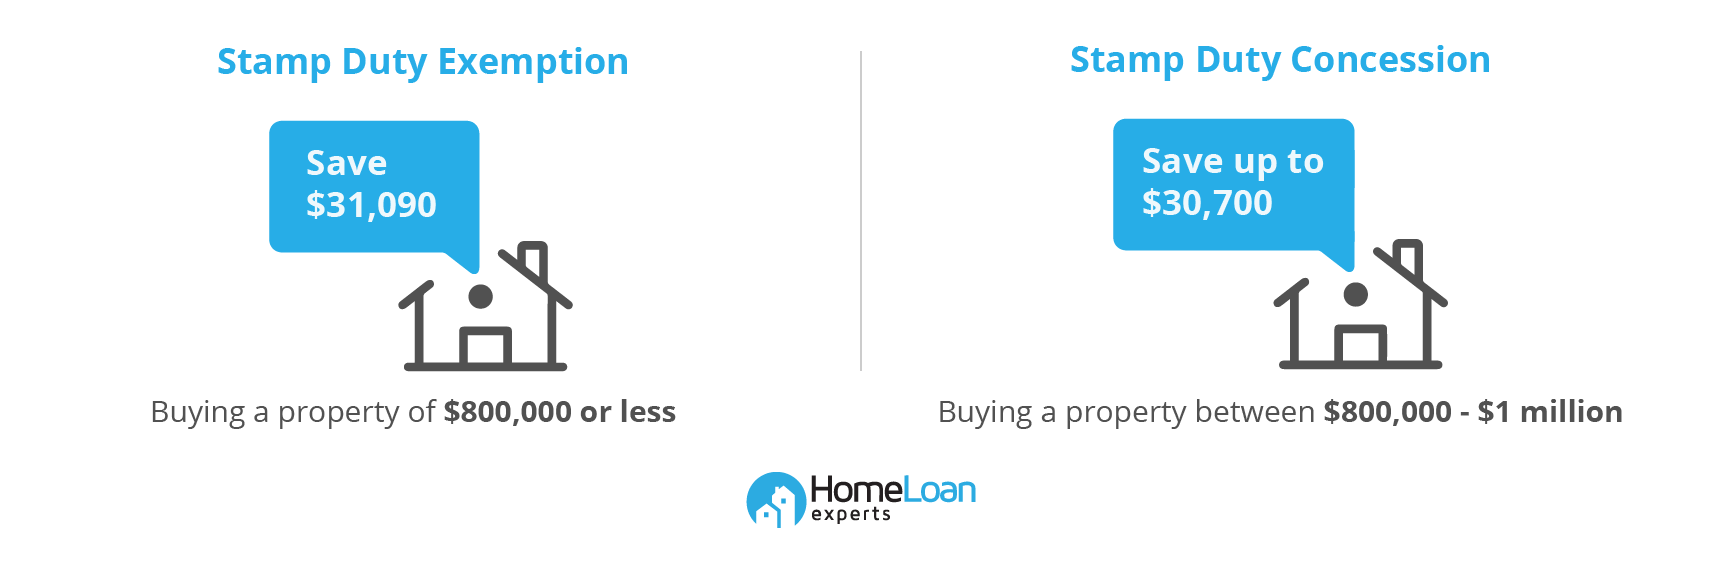 Savings from stamp duty exemption and concession for buying a property up to $1 million in NSW are shown side by side